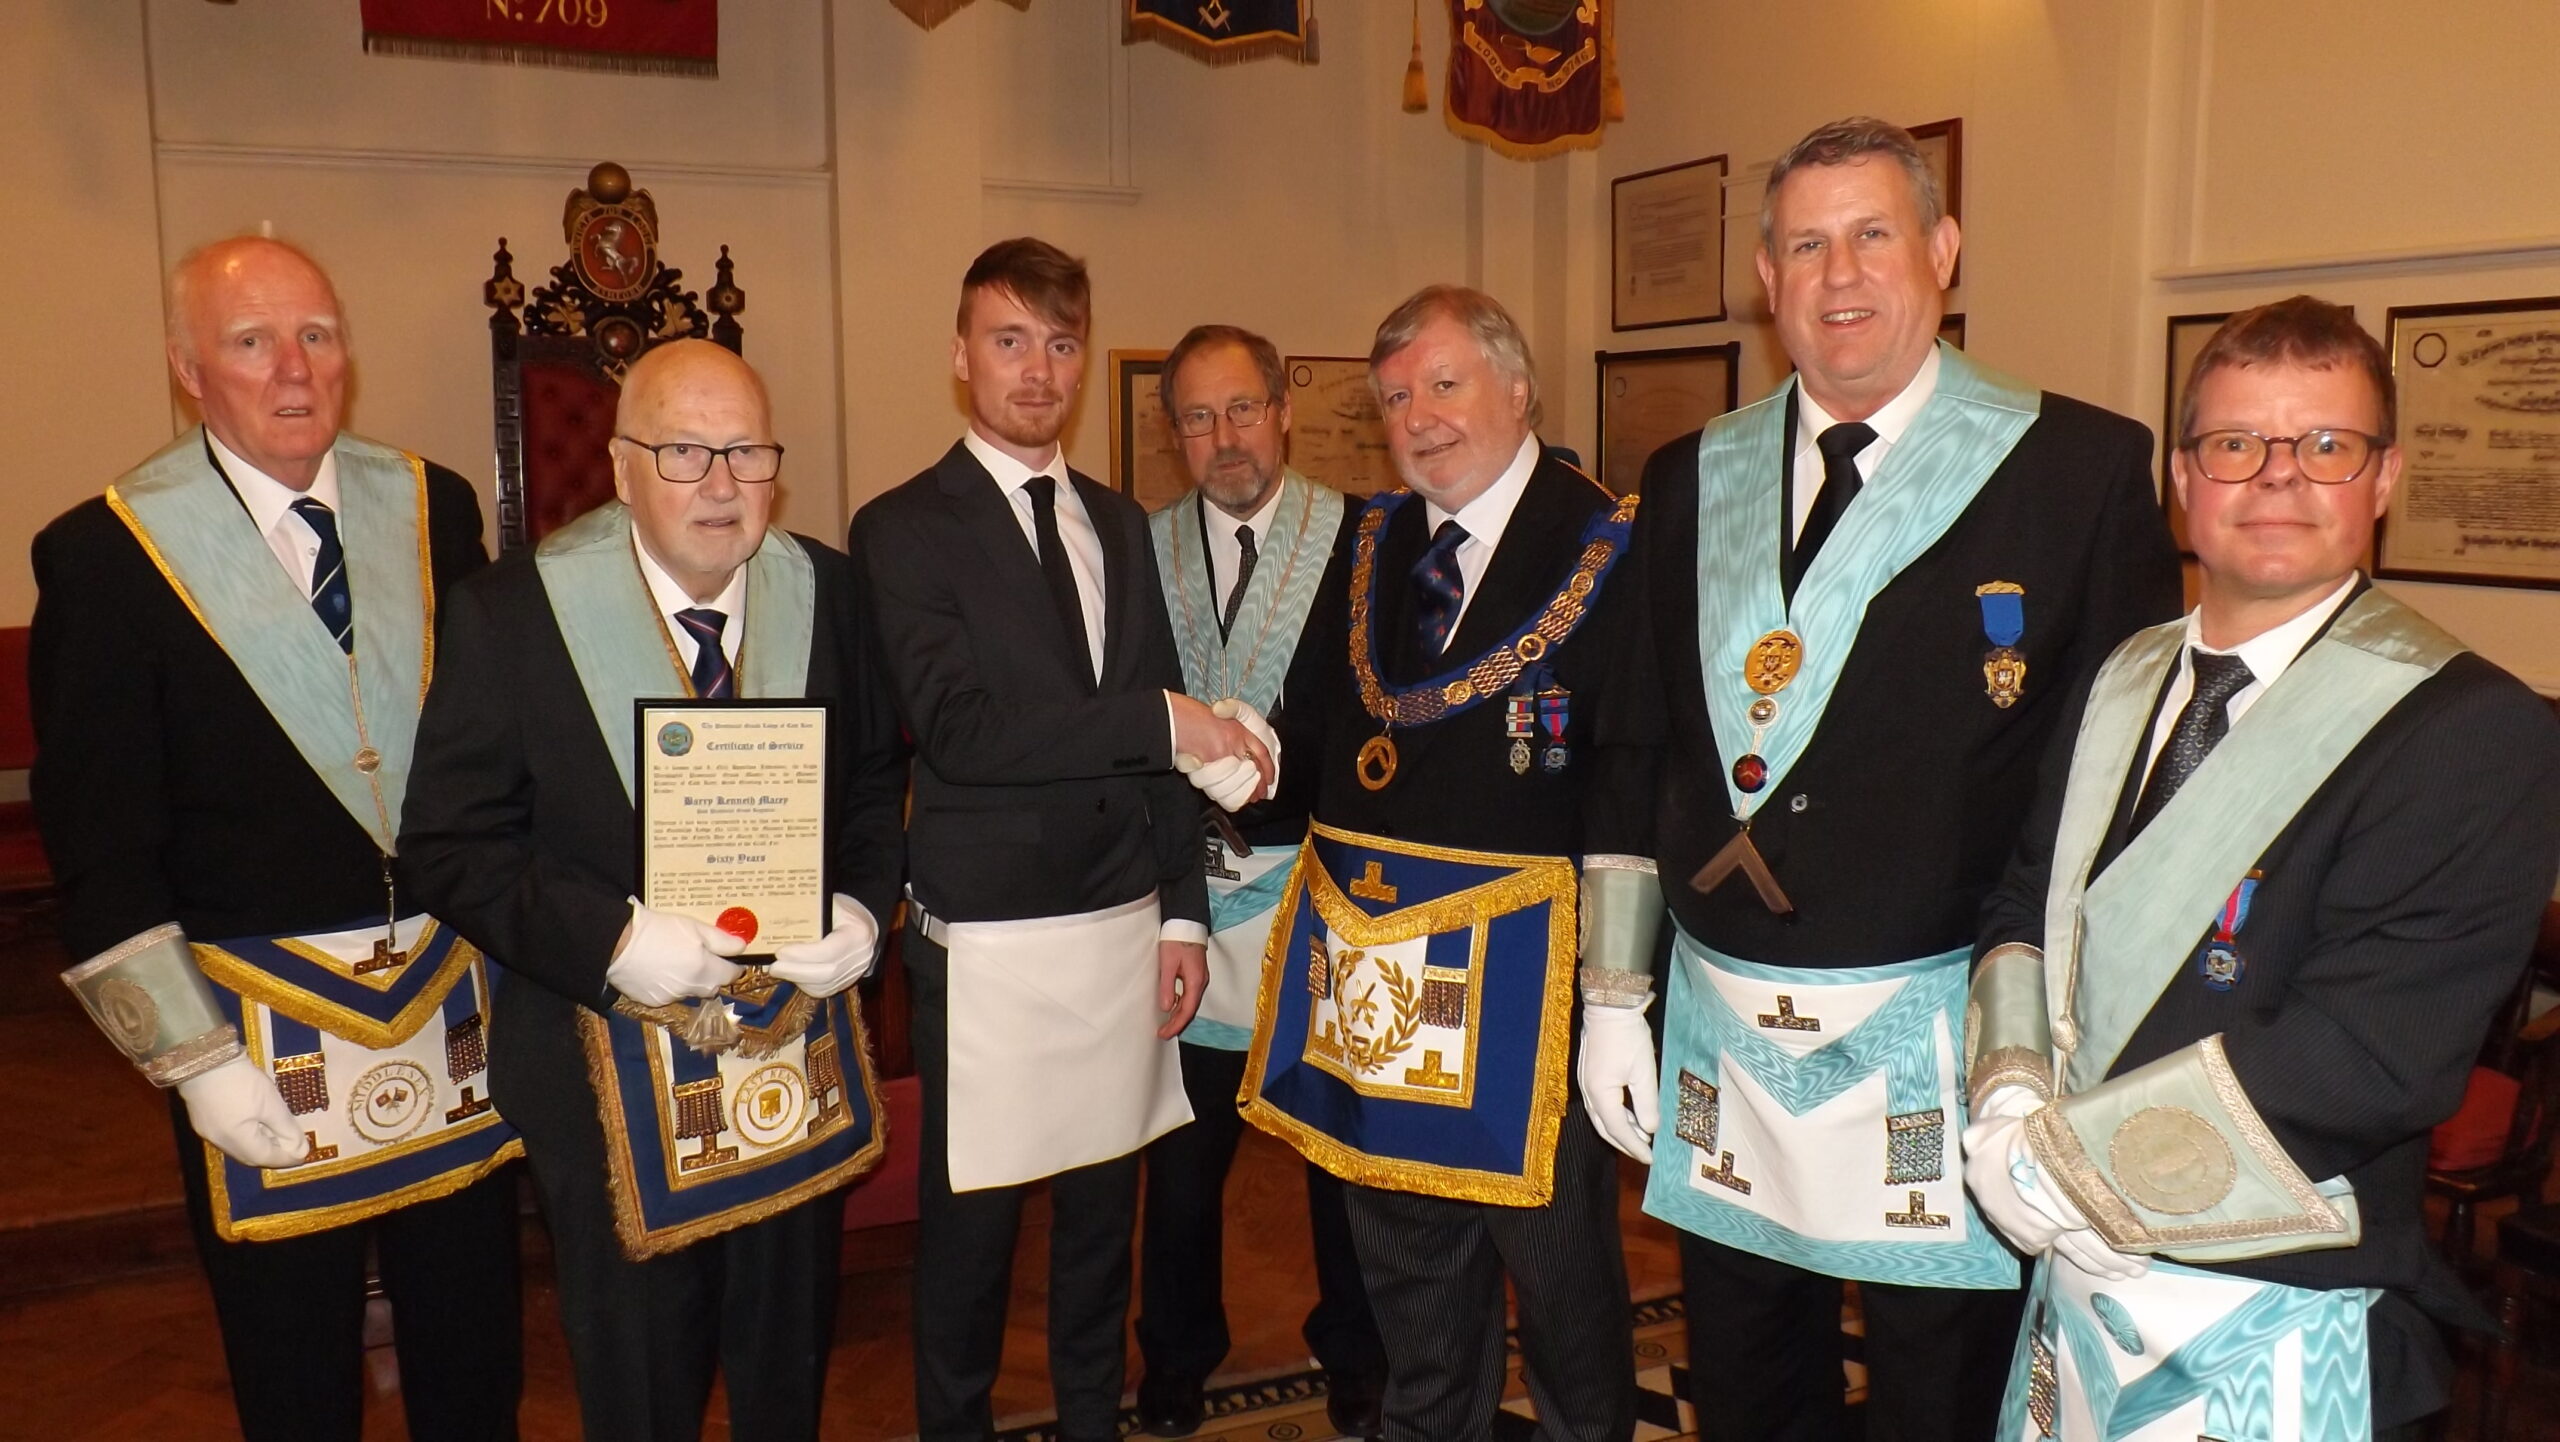 group photo of Matthew Harrison the new entrant shaking hands with the Deputy Provincial Grand Master Phil South